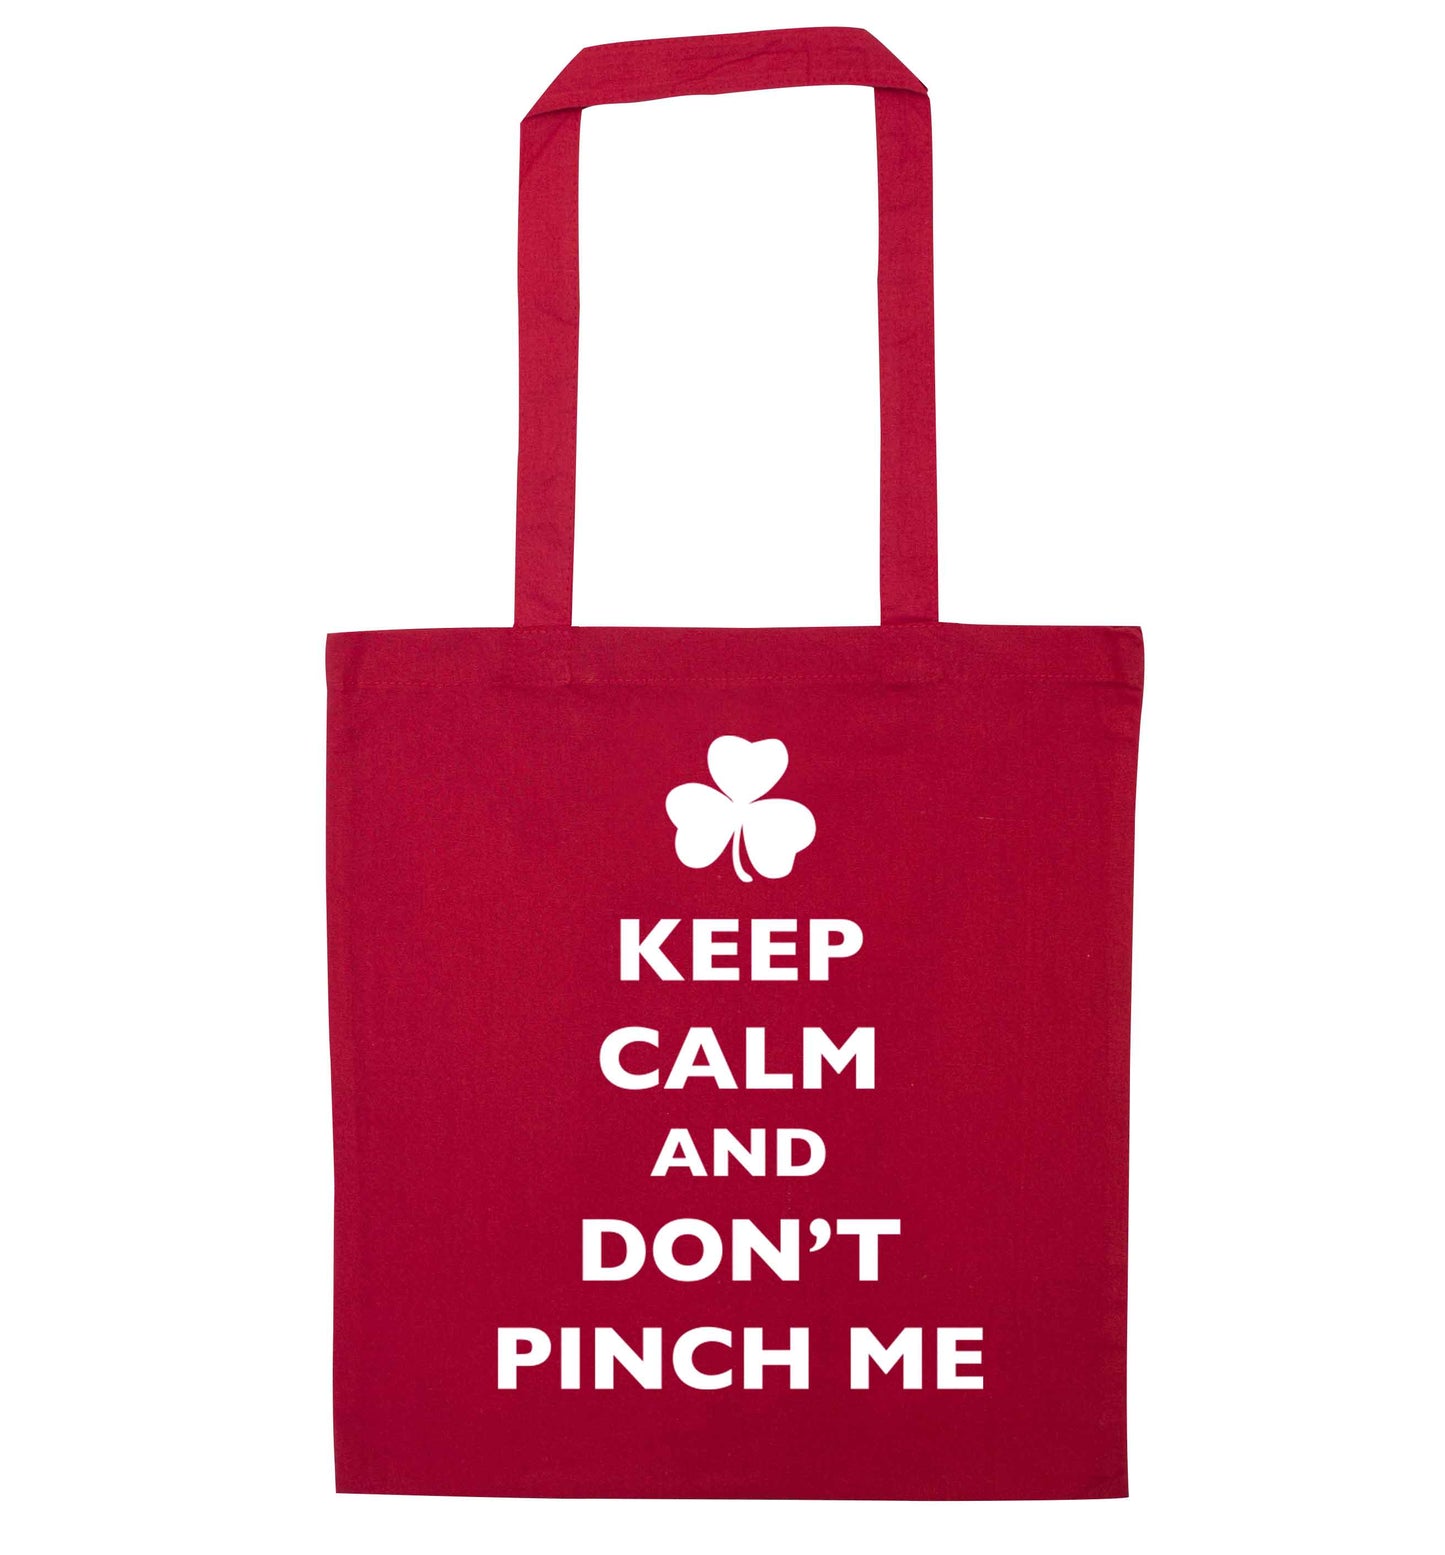 Keep calm and don't pinch me red tote bag